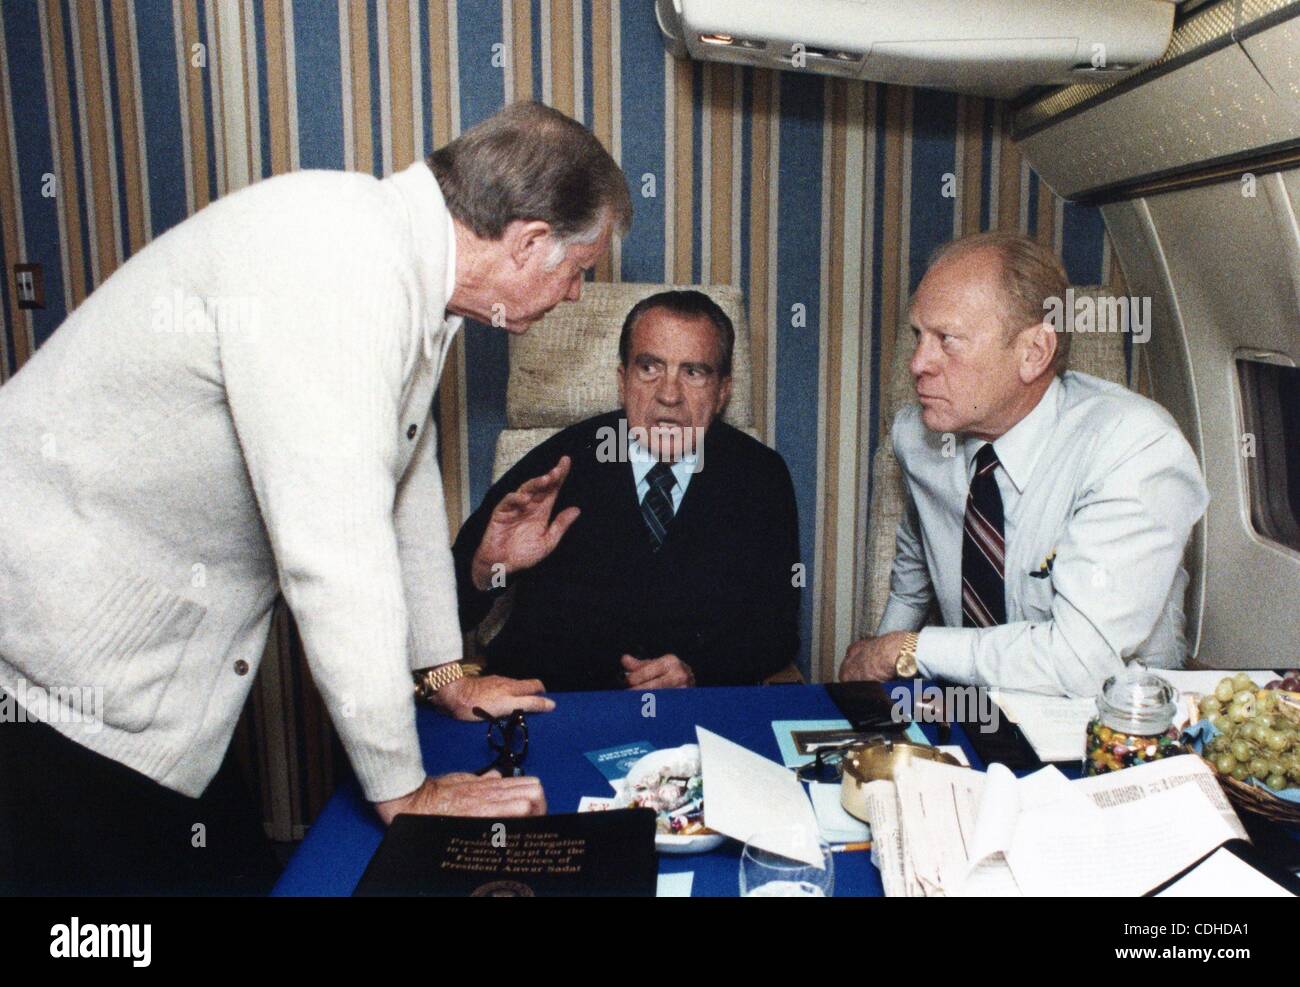 Feb. 3, 2011 - Washington, DISTRICT OF COLUMBIA, U.S. - (FILE) A file picture dated 10 October 1981 shows former US presidents Jimmy Carter (L), Richard M. Nixon (C) and Gerald R. Ford (R) aboard a airplane flying to attend the funeral of slain Egyptian President Anwar al Sadat in Cairo, Egypt. (Cre Stock Photo